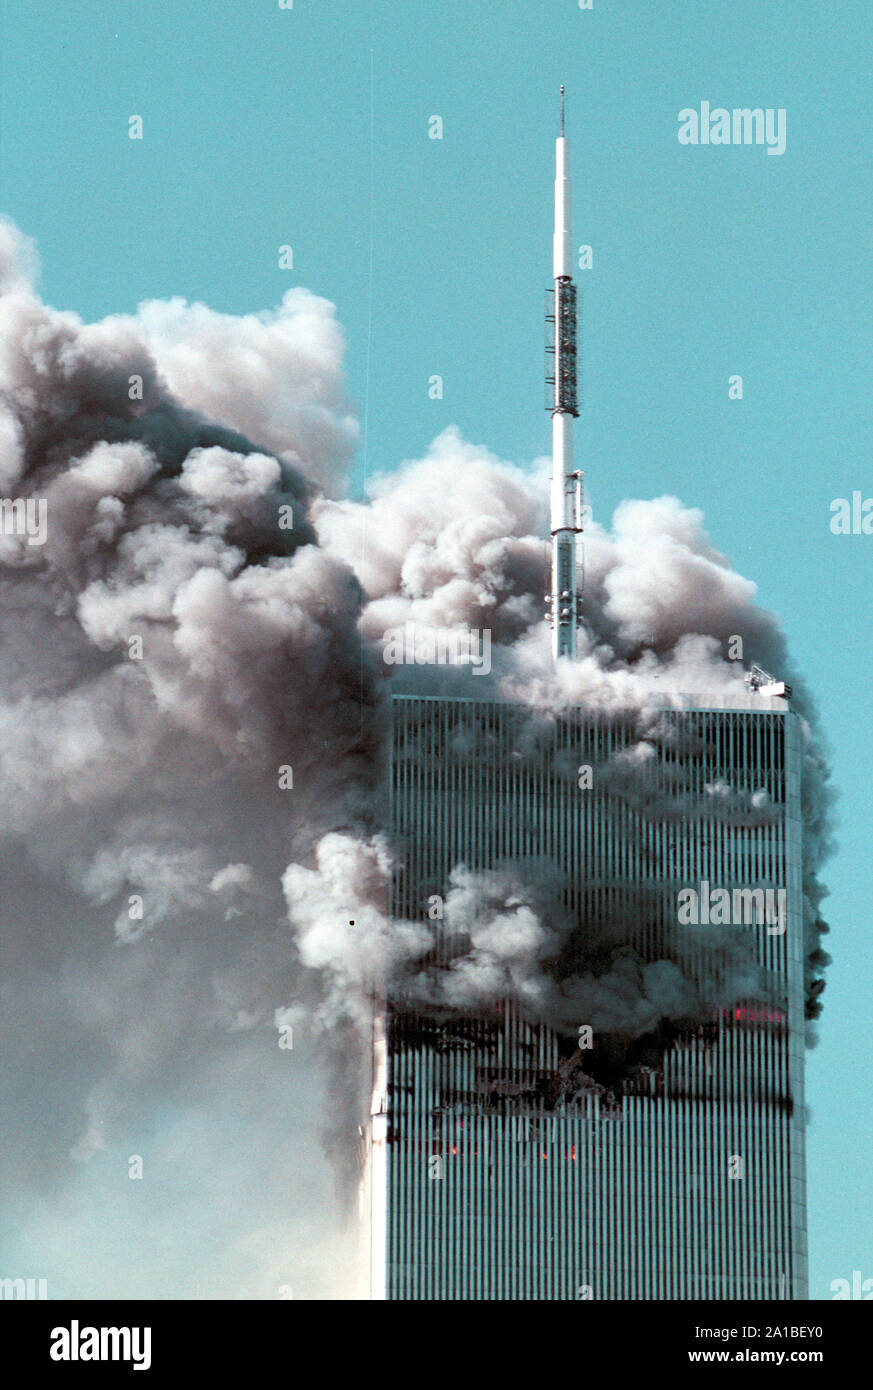 Two commercial jetplanes crashes into each of twin towers of the World Trade Center in a coordinated terror attack orchestrated by Osama Bin Laden. Stock Photo